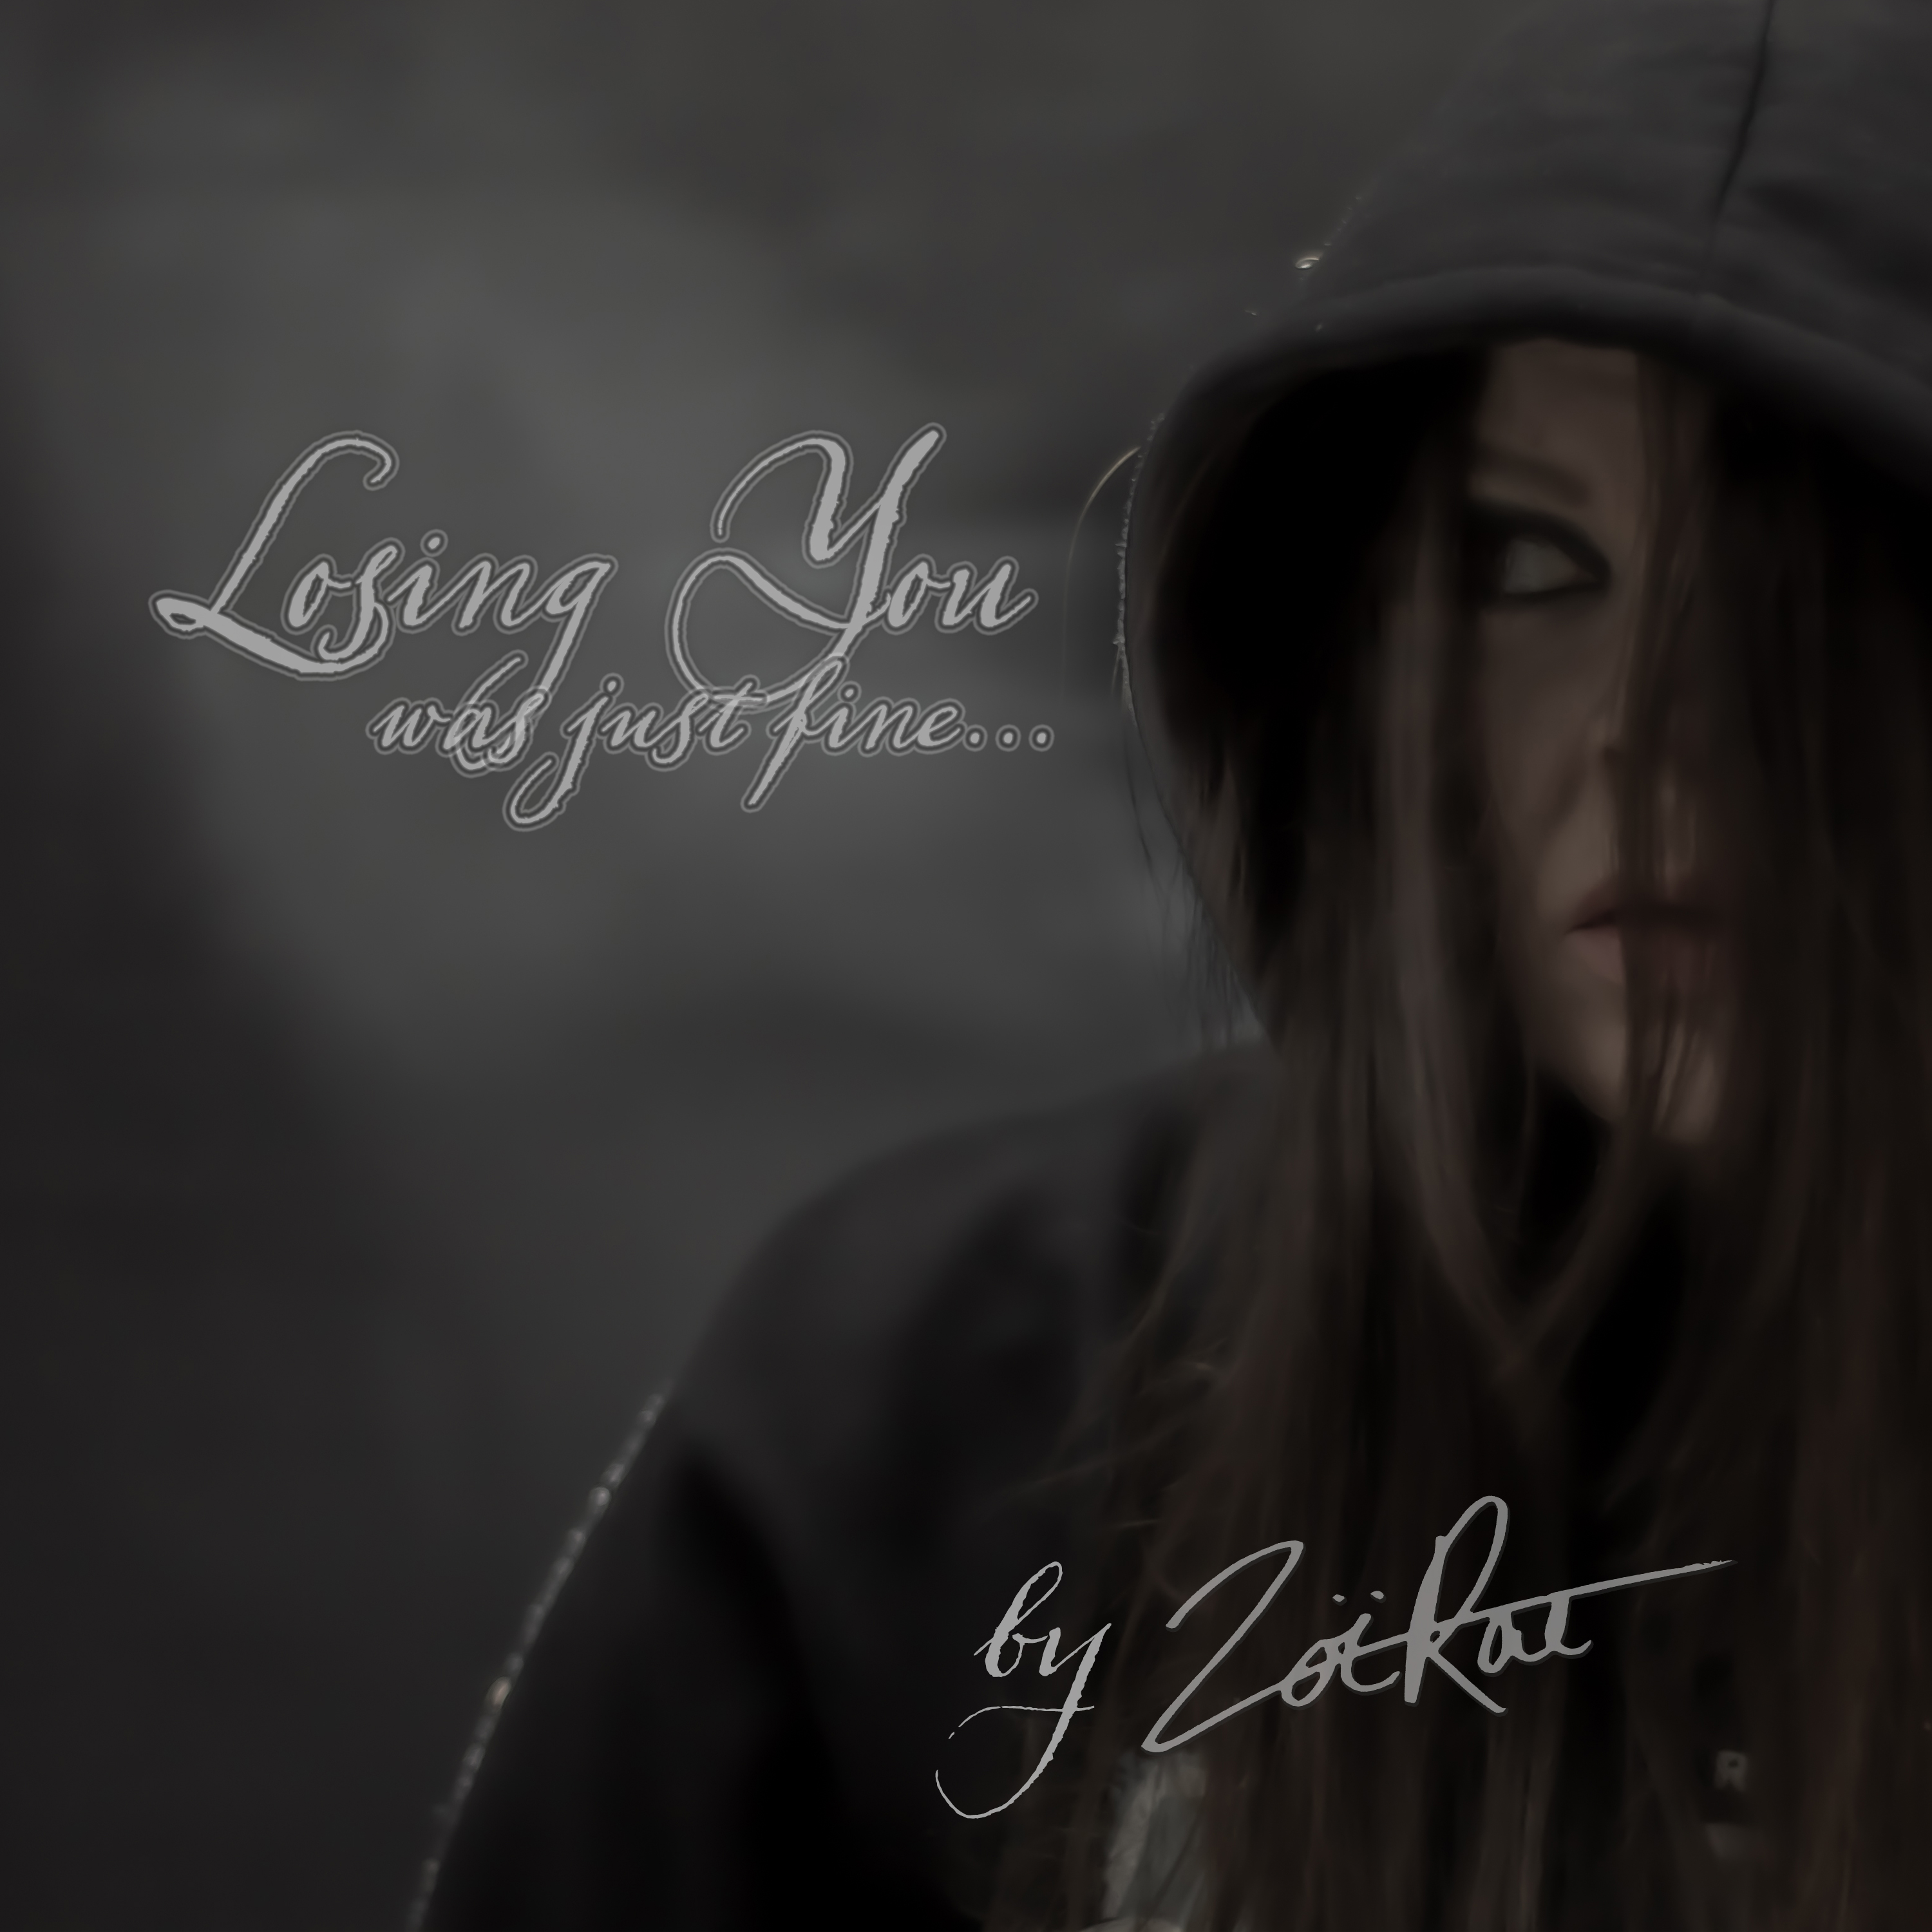 Losing You (was just fine...) by Zoë Rae